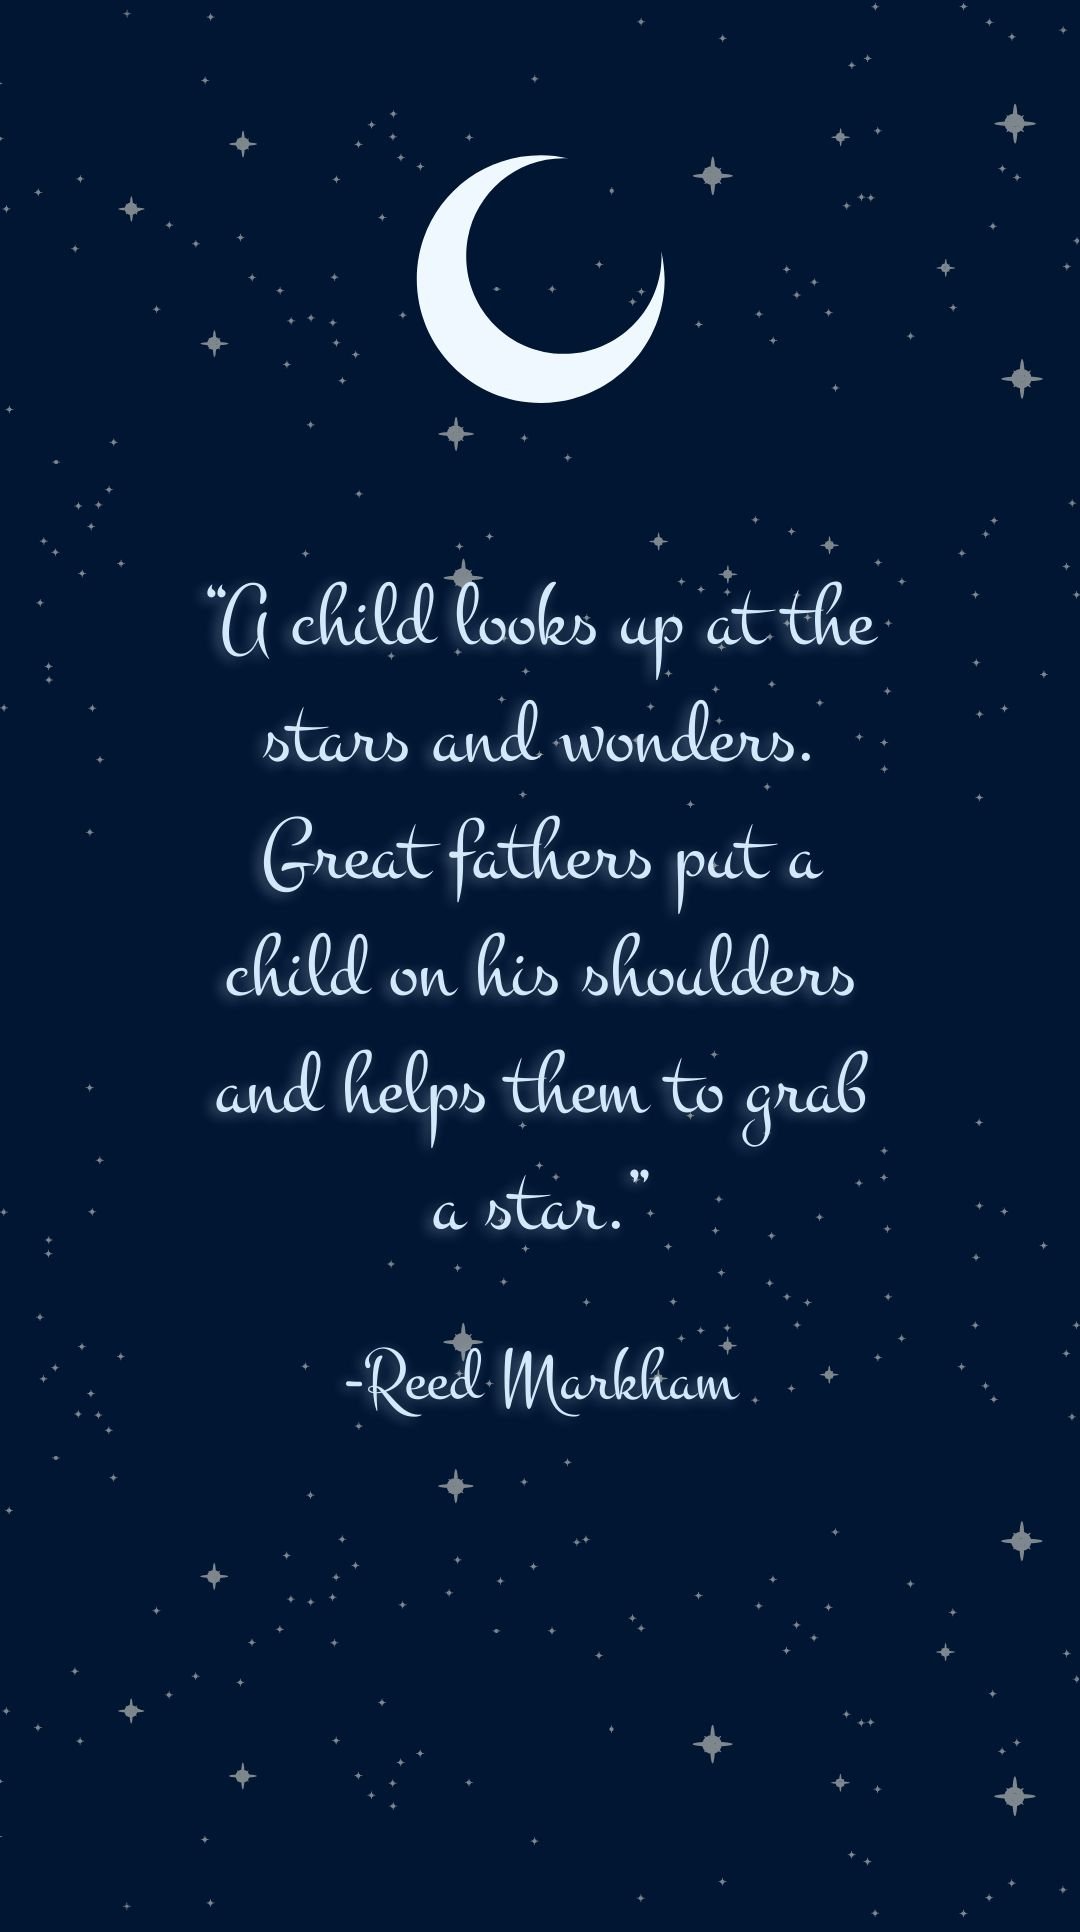 Reed Markham - A child looks up at the stars and wonders. Great fathers put a child on his shoulders and helps them to grab a star. in JPG